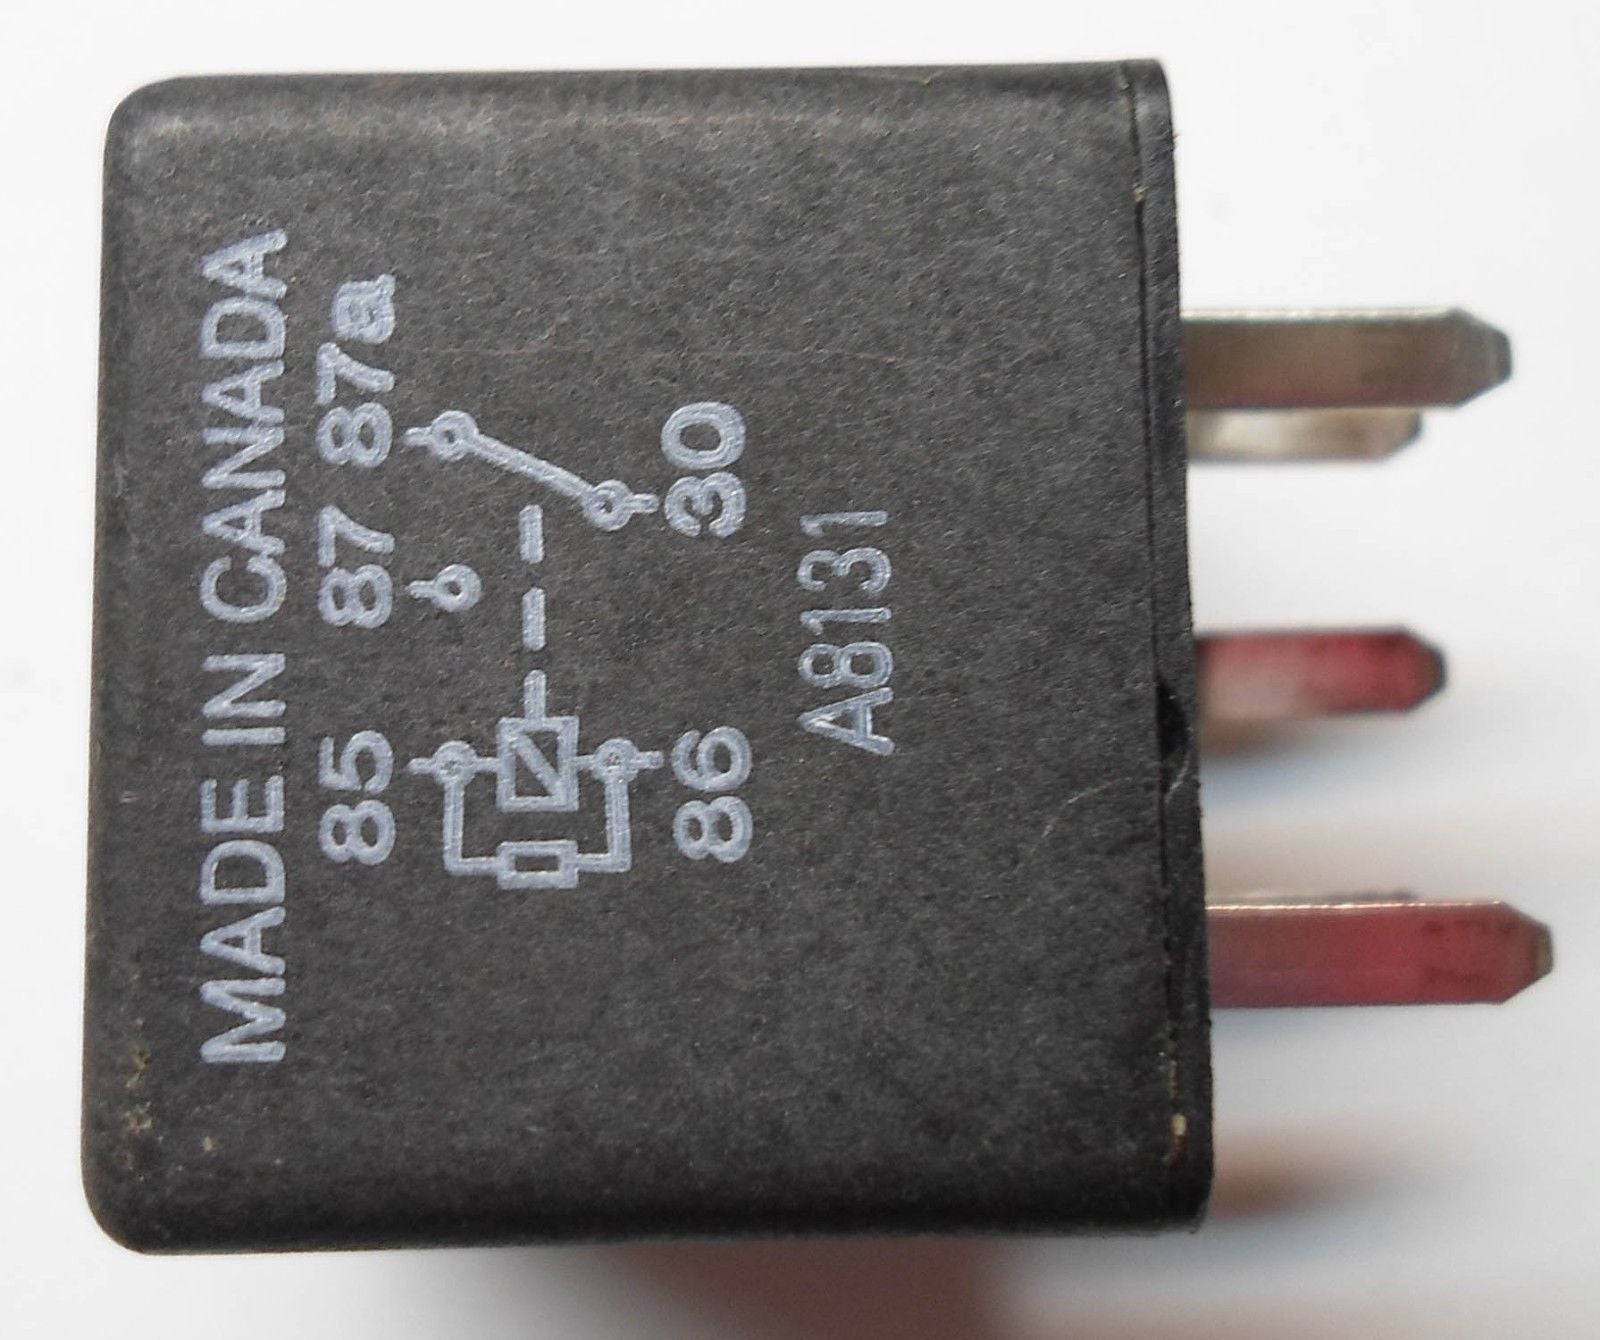 GM OMRON  RELAY 12177234   OEM FREE SHIPPING 6 MONTH WARRANTY! GM4